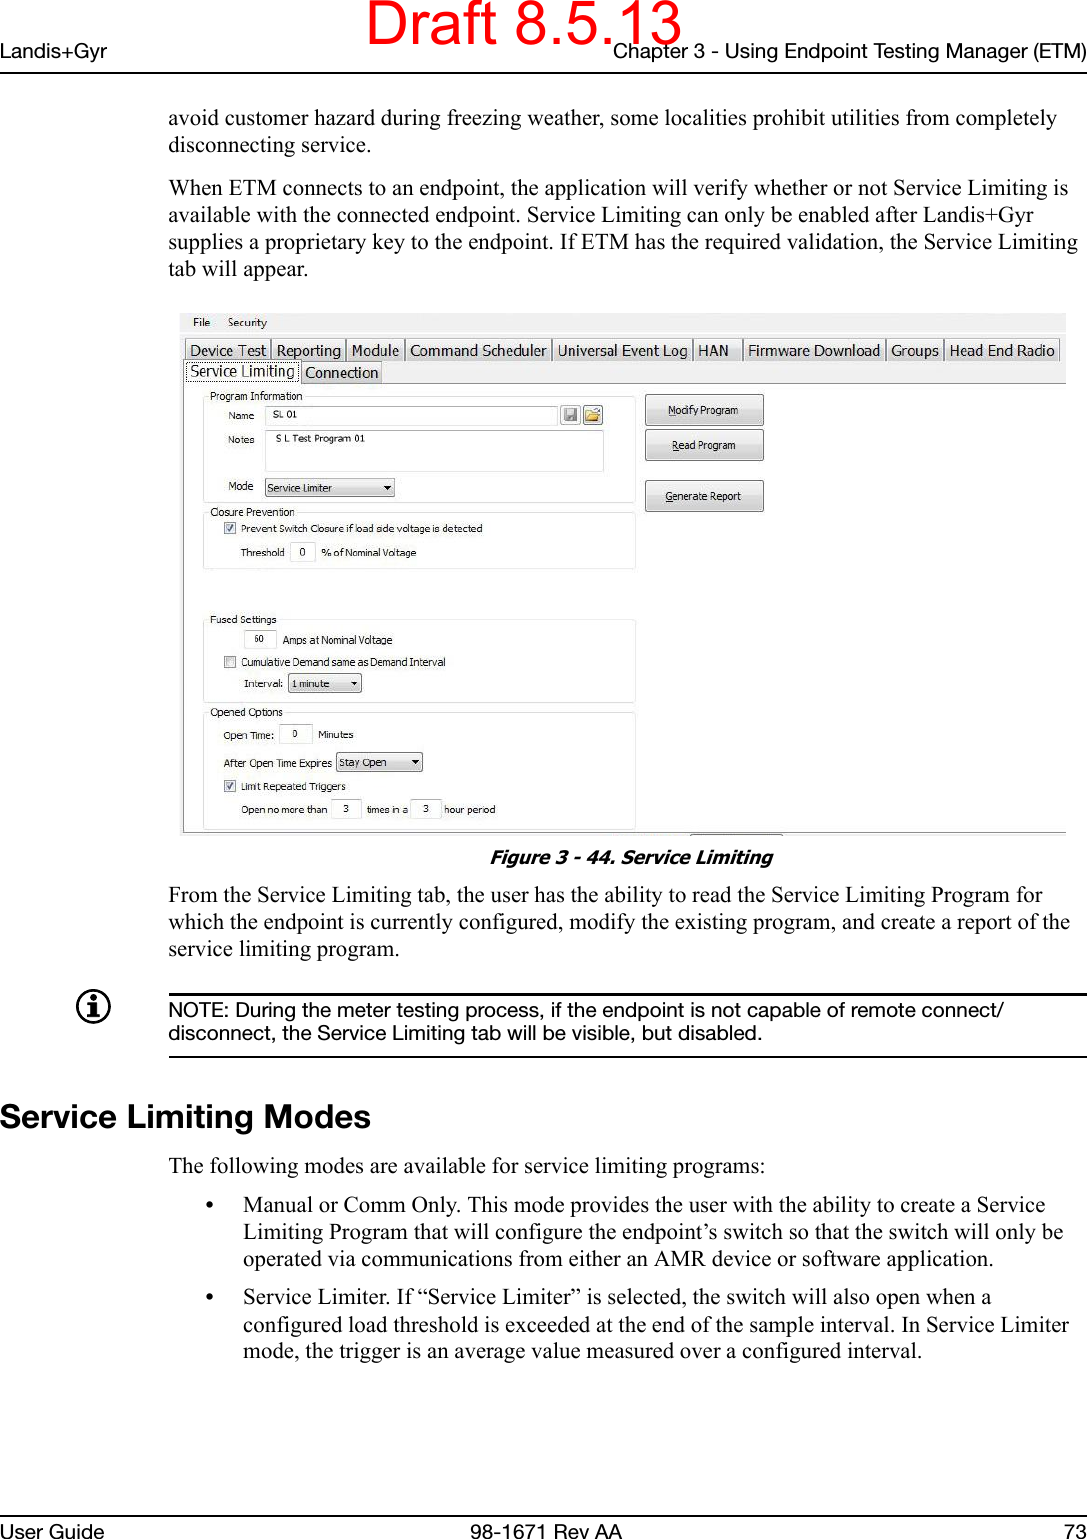 Landis+Gyr Chapter 3 - Using Endpoint Testing Manager (ETM)User Guide  98-1671 Rev AA 73avoid customer hazard during freezing weather, some localities prohibit utilities from completely disconnecting service. When ETM connects to an endpoint, the application will verify whether or not Service Limiting is available with the connected endpoint. Service Limiting can only be enabled after Landis+Gyr supplies a proprietary key to the endpoint. If ETM has the required validation, the Service Limiting tab will appear. Figure 3 - 44. Service LimitingFrom the Service Limiting tab, the user has the ability to read the Service Limiting Program for which the endpoint is currently configured, modify the existing program, and create a report of the service limiting program.NOTE: During the meter testing process, if the endpoint is not capable of remote connect/disconnect, the Service Limiting tab will be visible, but disabled.Service Limiting ModesThe following modes are available for service limiting programs:•Manual or Comm Only. This mode provides the user with the ability to create a Service Limiting Program that will configure the endpoint’s switch so that the switch will only be operated via communications from either an AMR device or software application.•Service Limiter. If “Service Limiter” is selected, the switch will also open when a configured load threshold is exceeded at the end of the sample interval. In Service Limiter mode, the trigger is an average value measured over a configured interval.Draft 8.5.13